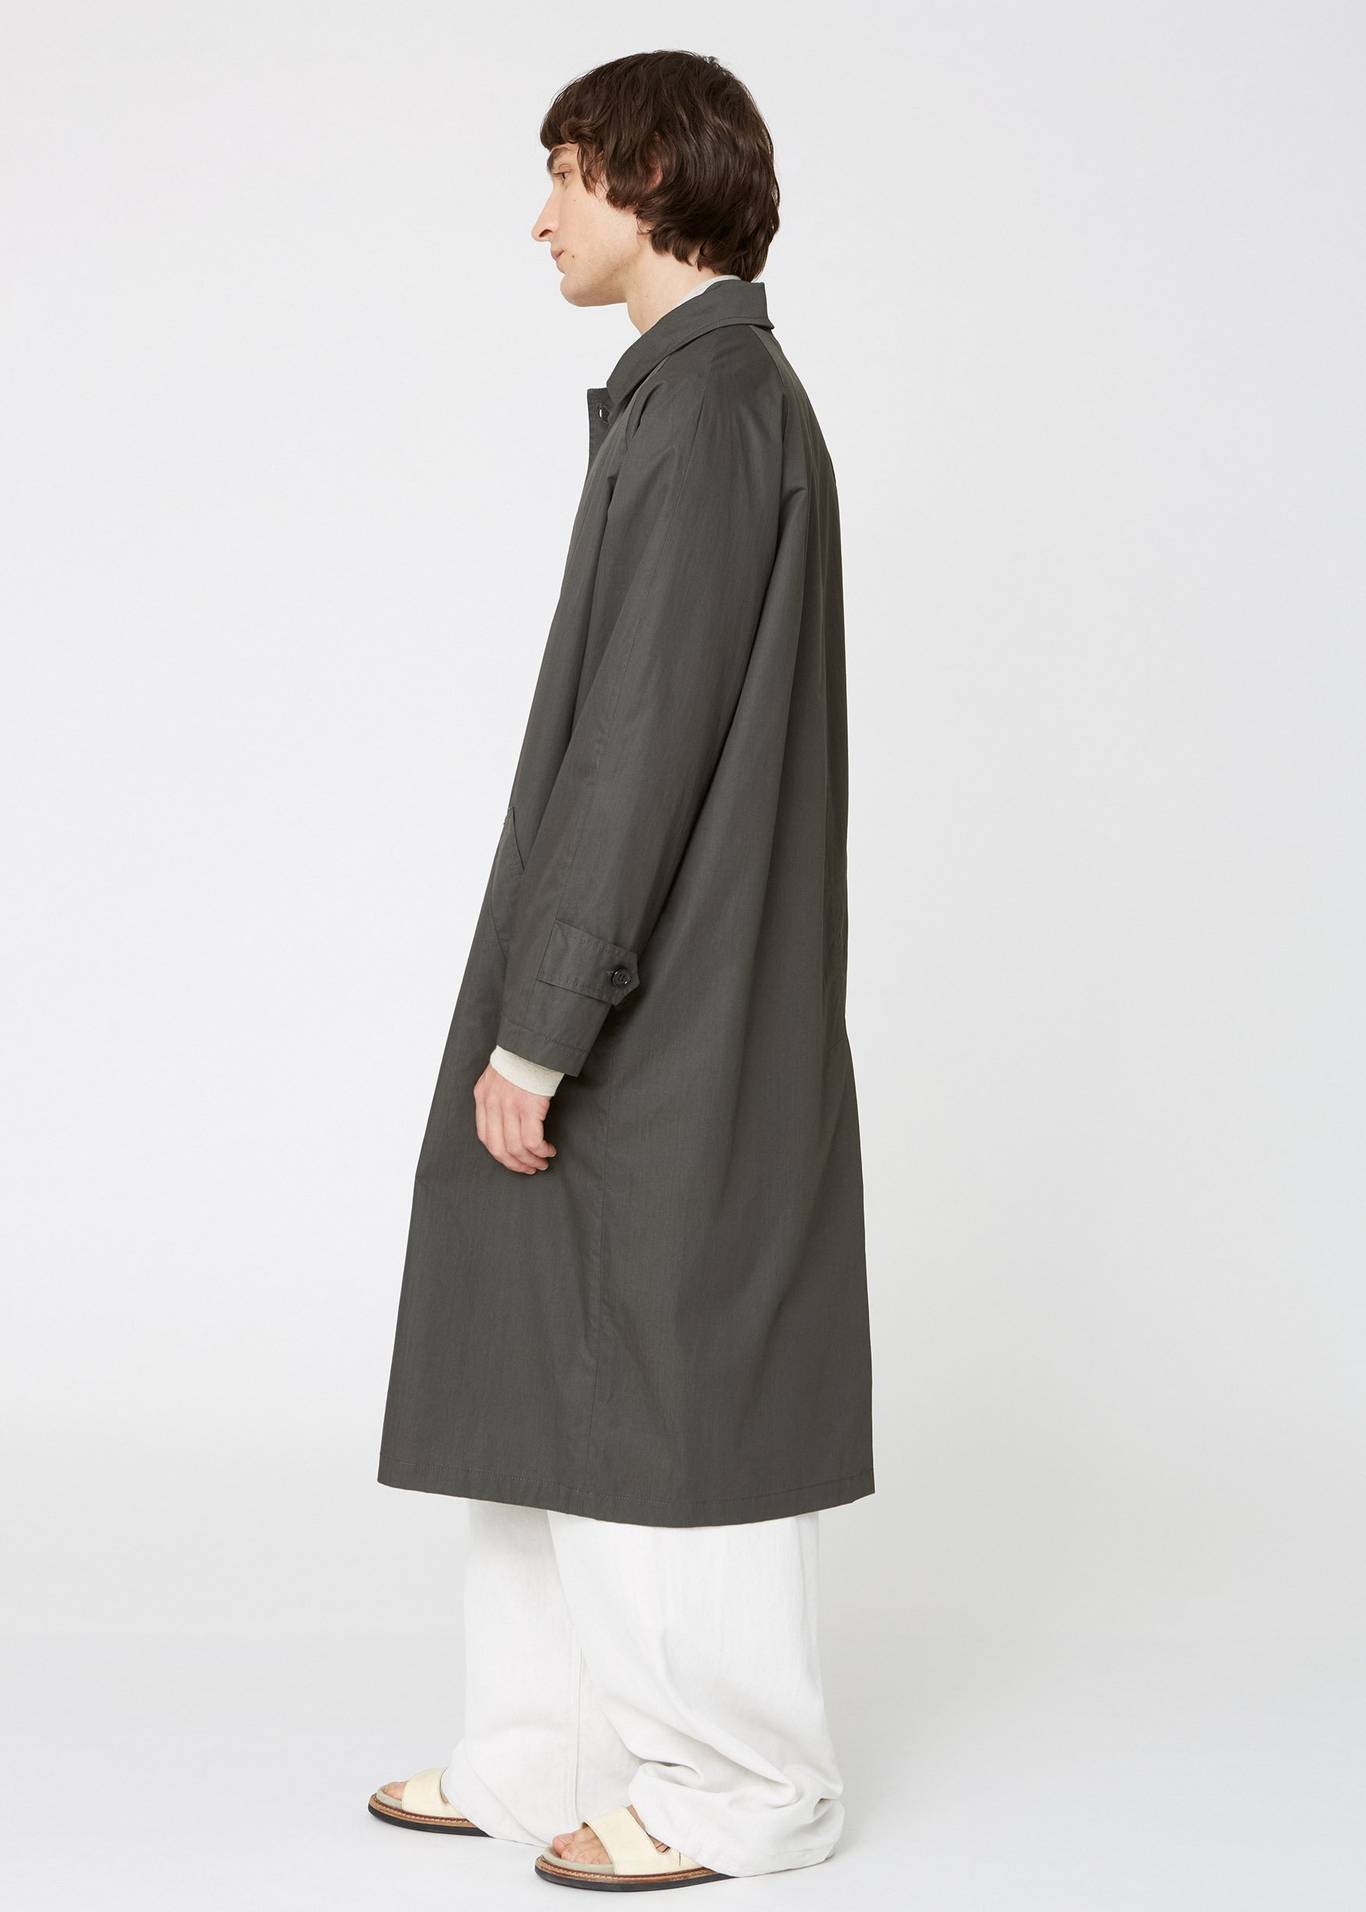 Piece coat in pirate black by Hope